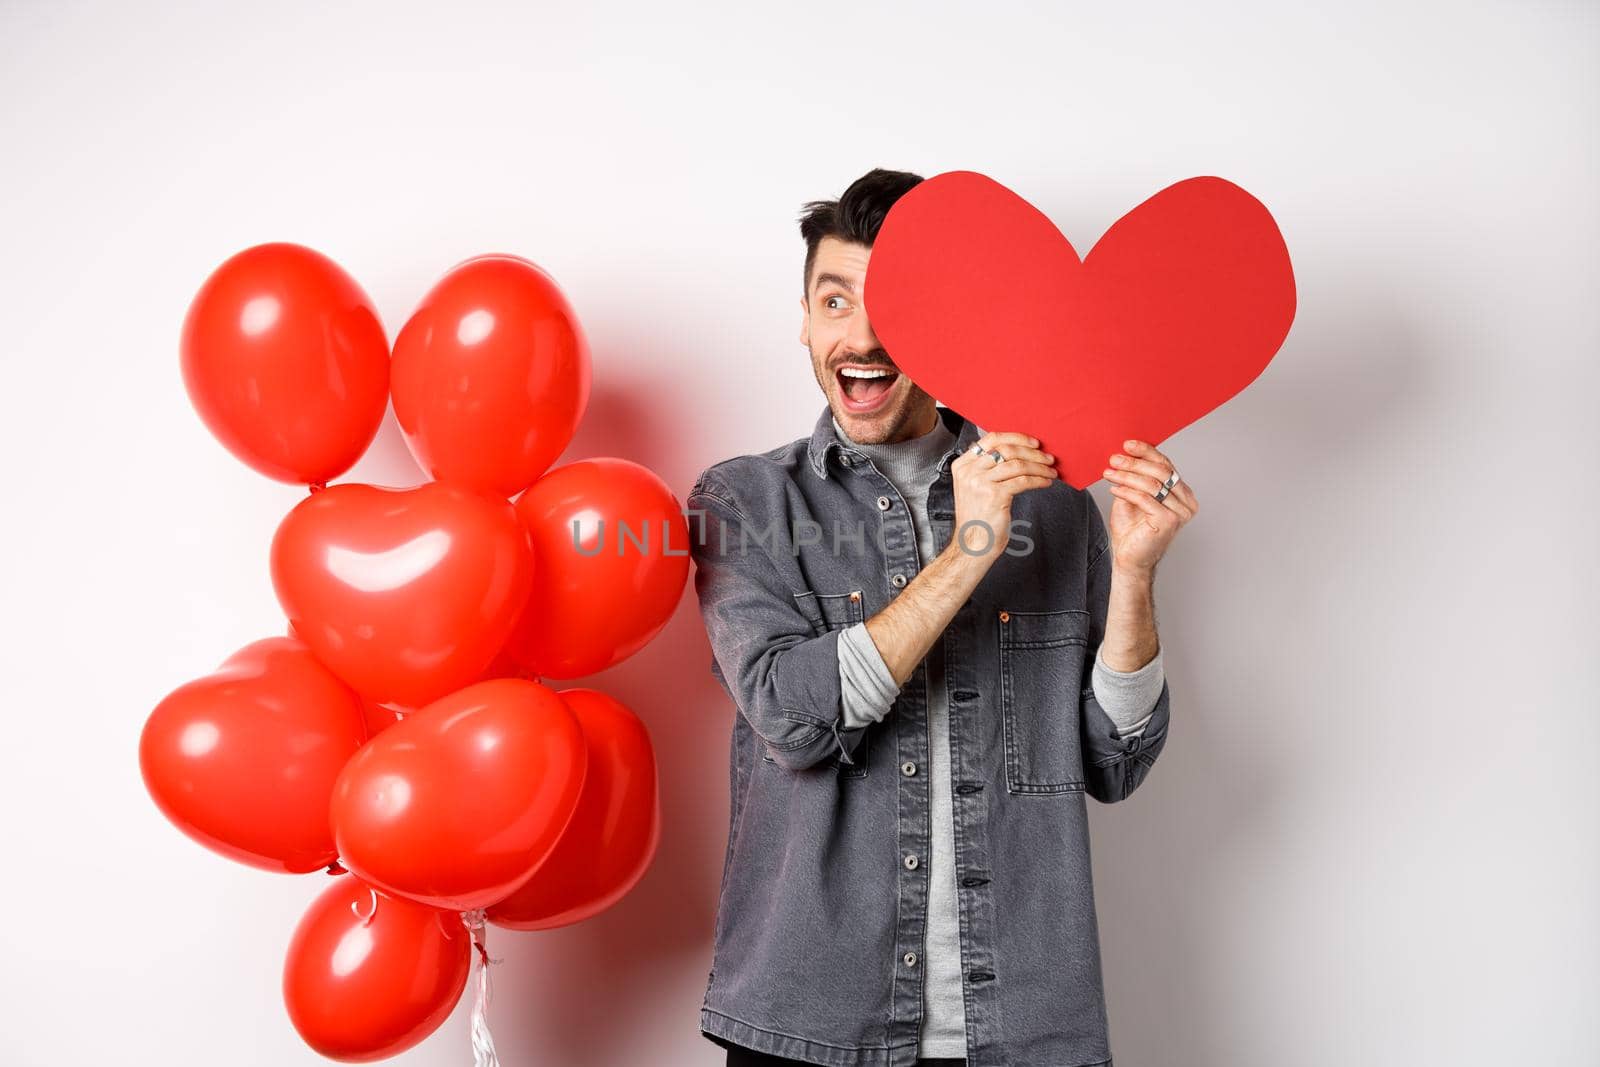 Romantic cheerful man cover half of face with Valentine heart cutout and smiling amazed, celebrating love holiday, standing on white background.